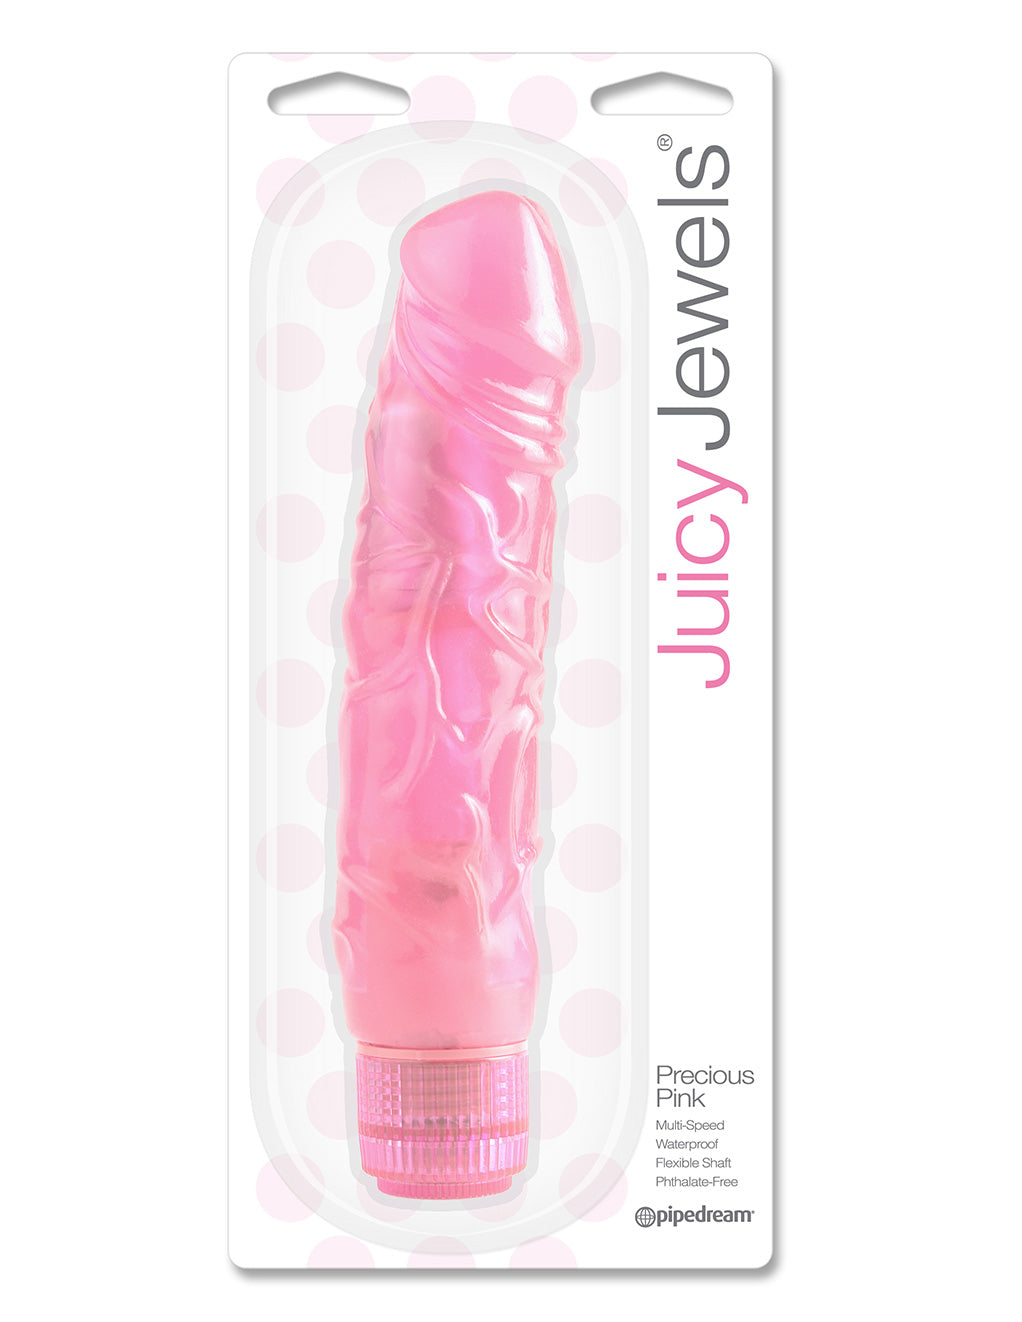 Juicy Jewels by Pipedream Precious Pink Vibrator - Novelties - Massager